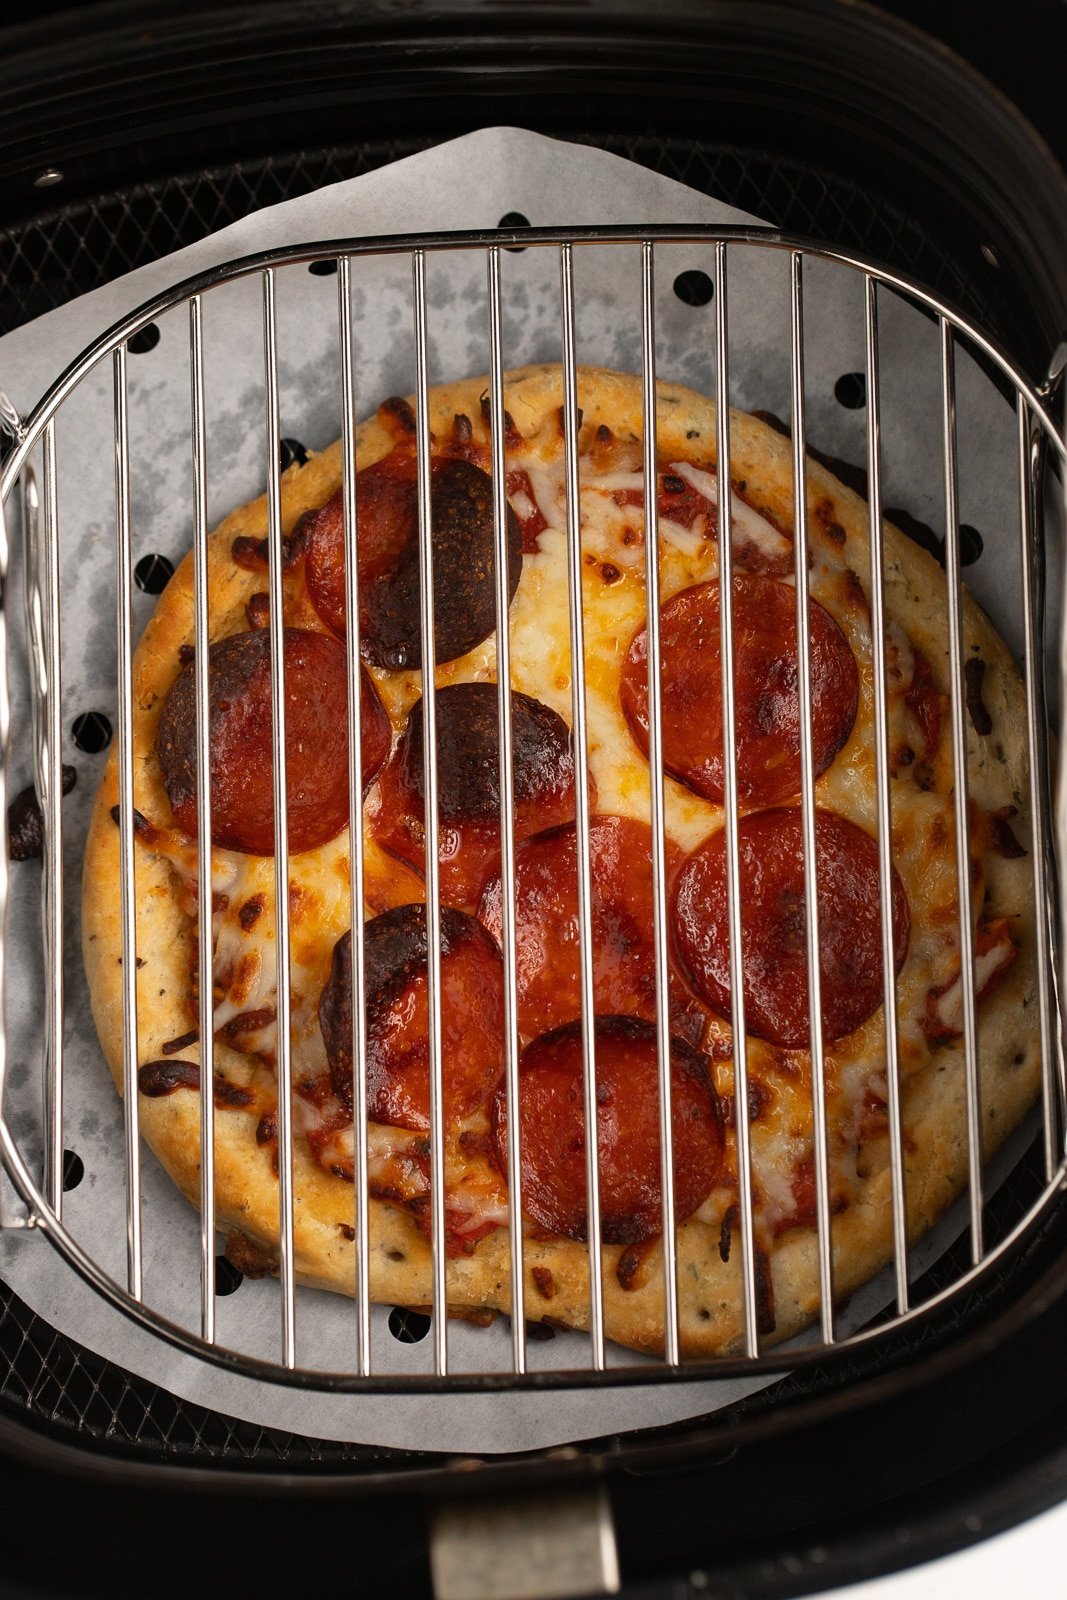 The cooked pizza in the air fryer basket with a rack over the top.